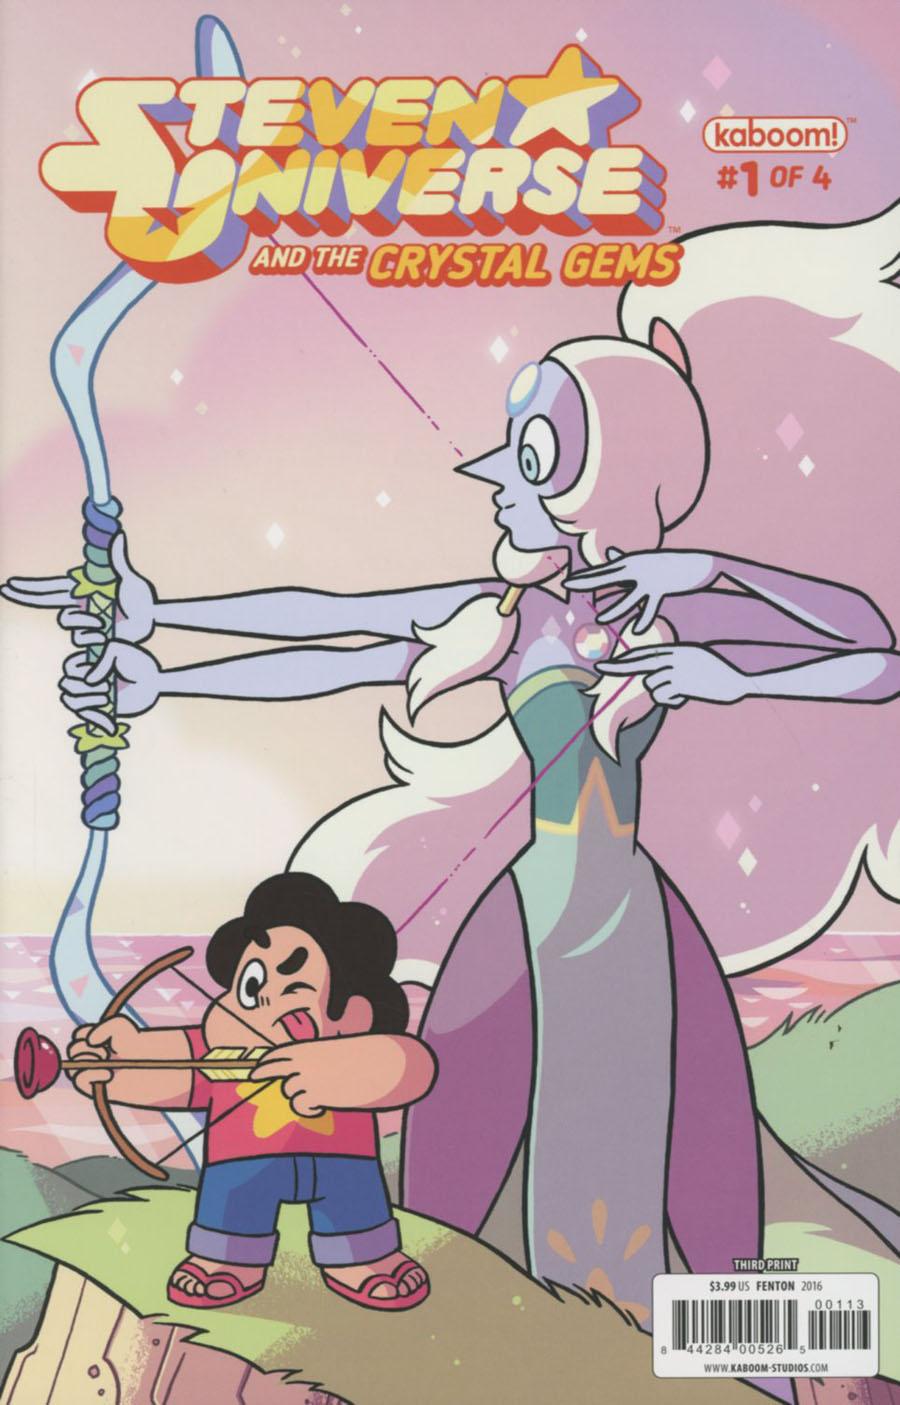 Steven Universe And The Crystal Gems Vol. 1 #1